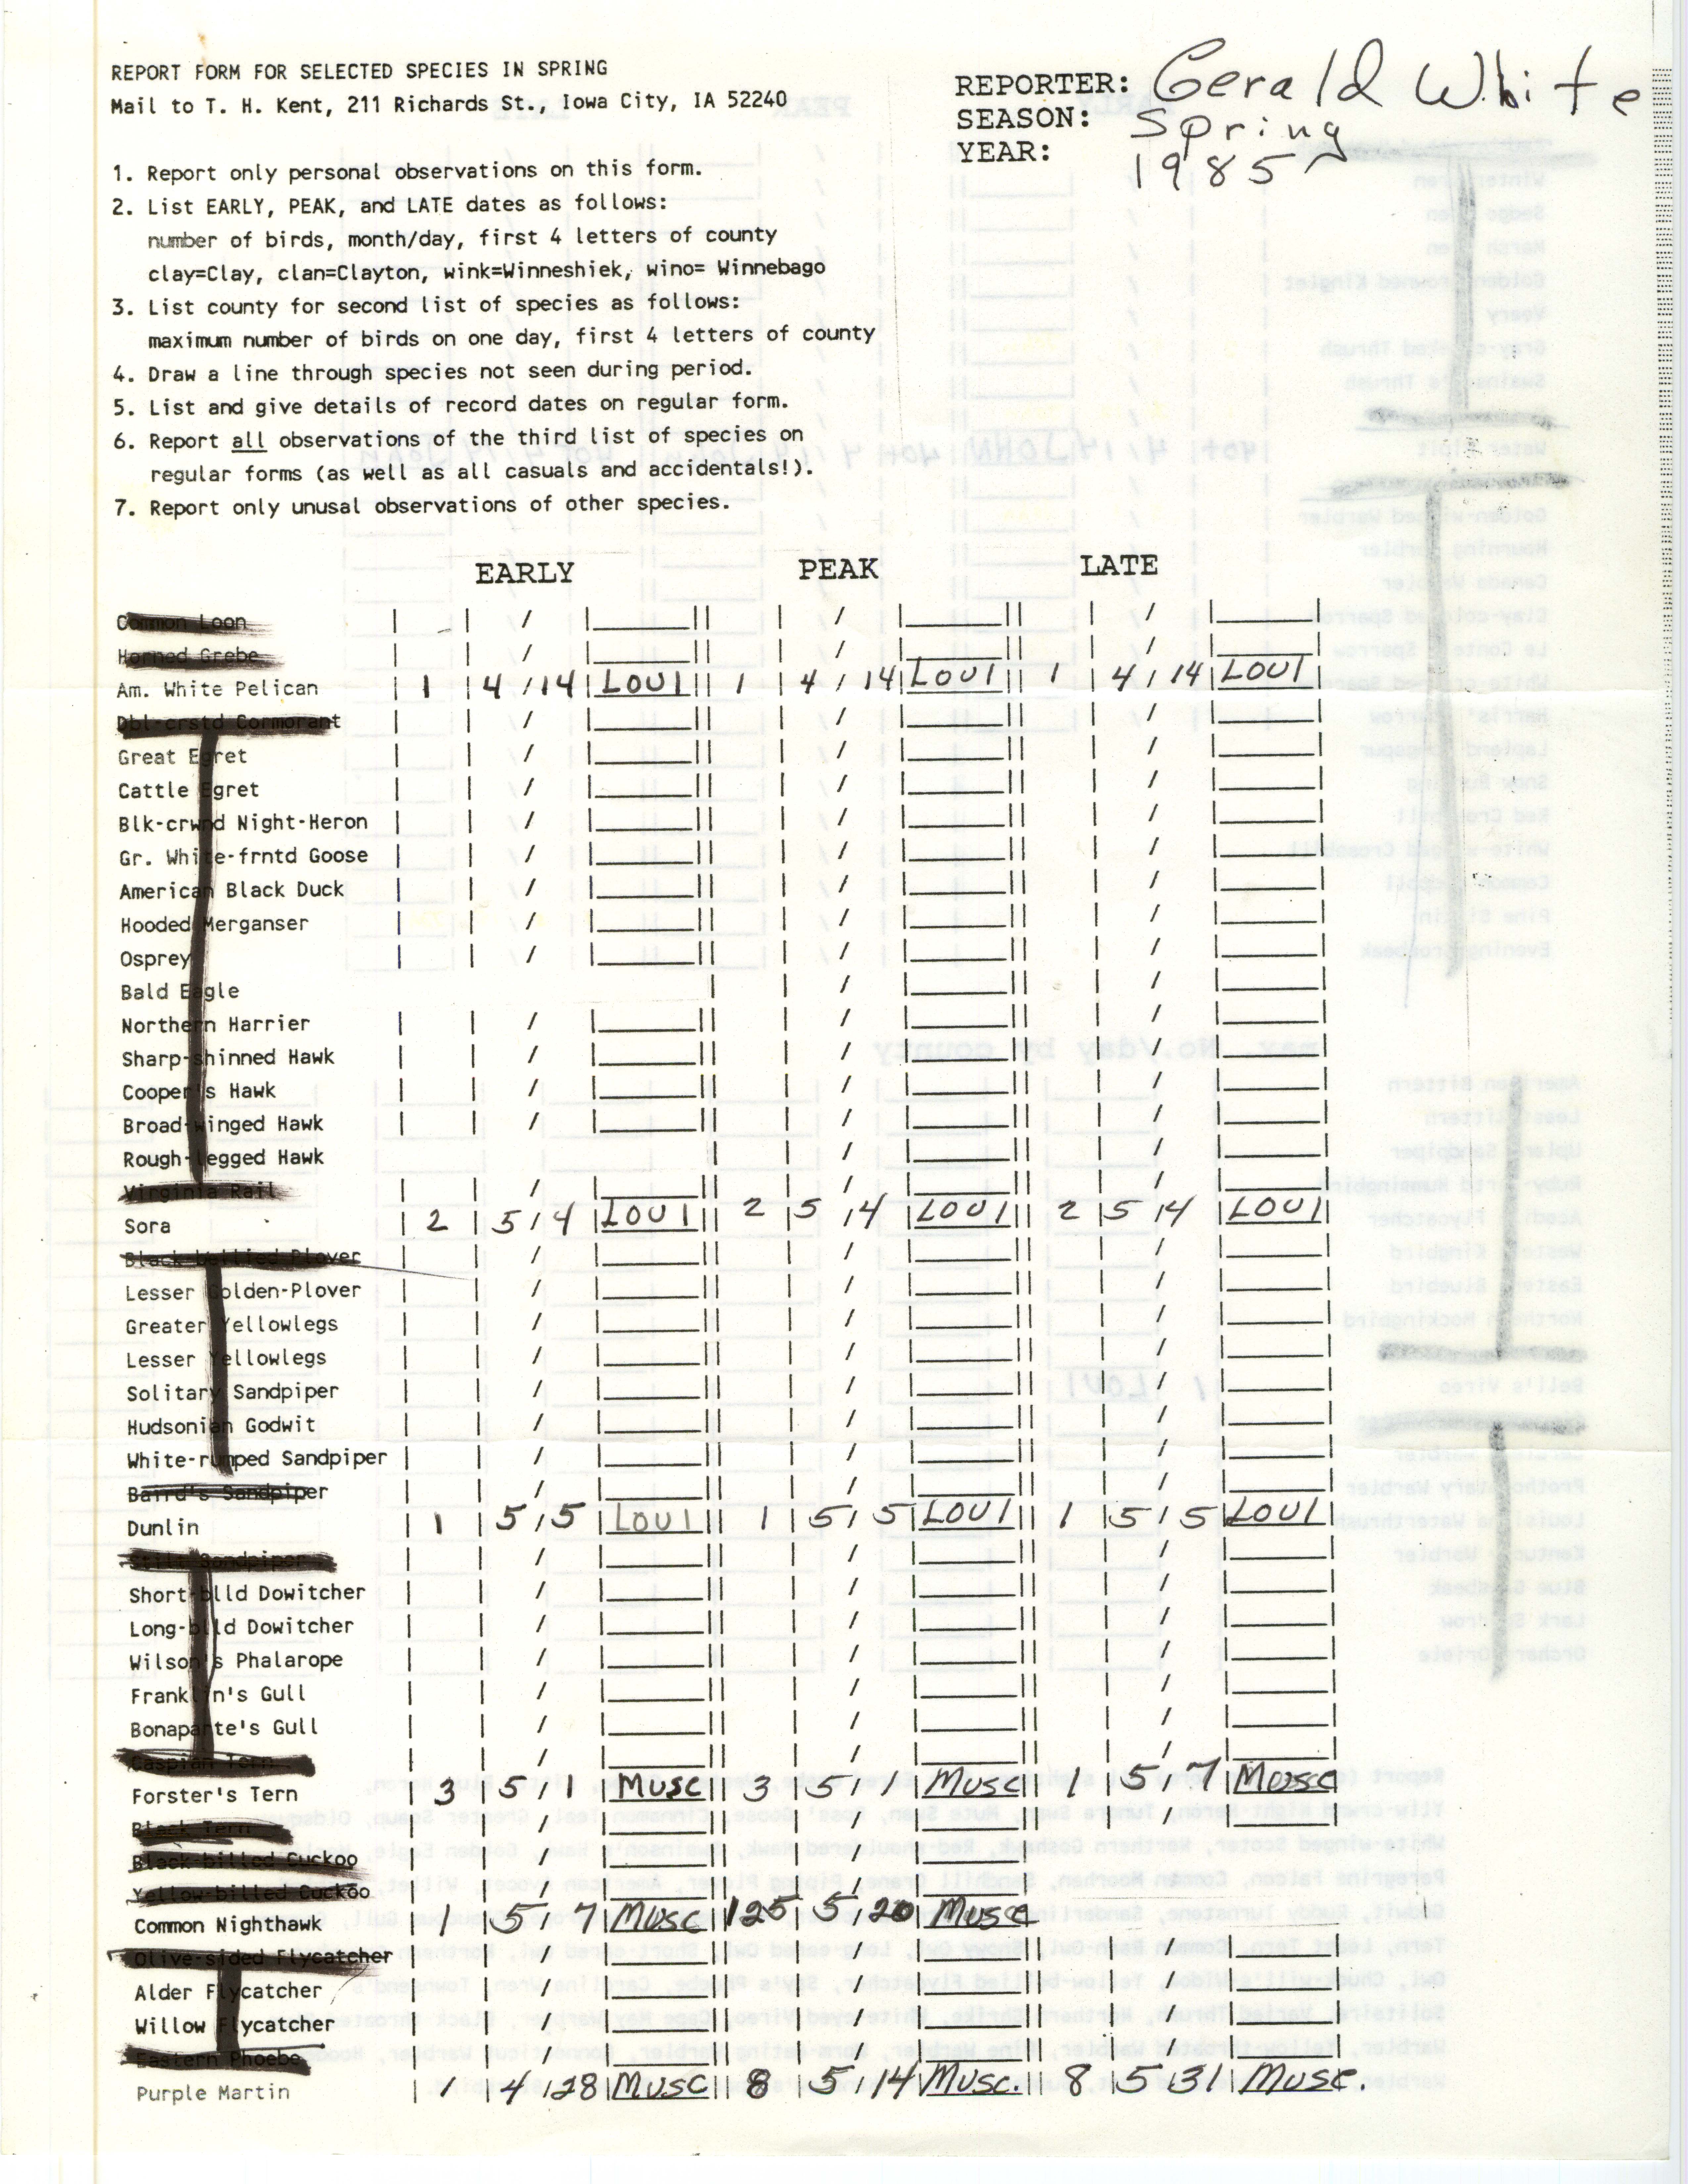 Report form for selected species in spring, contributed by Gerald White, spring 1985